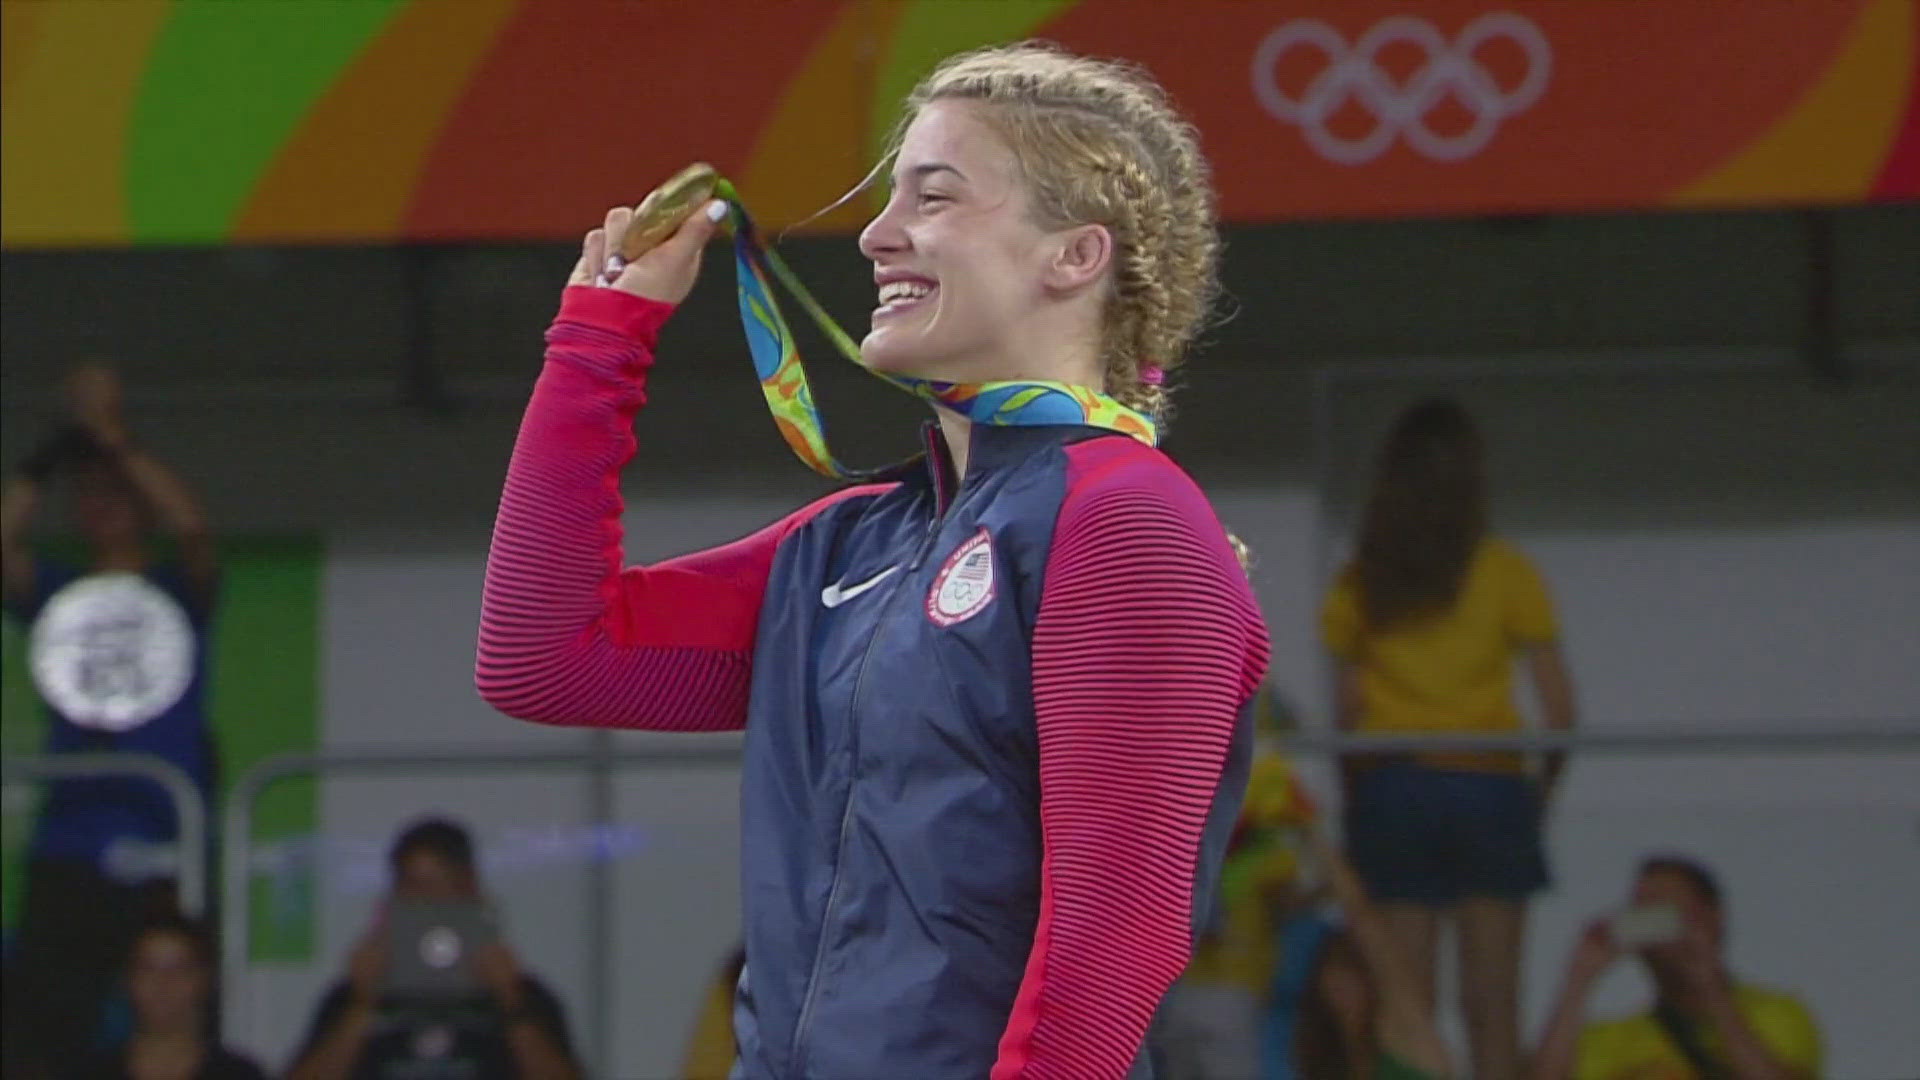 Helen Maroulis is a gold-medal wrestler. But she also enjoys salsa dancing and playing the harp.